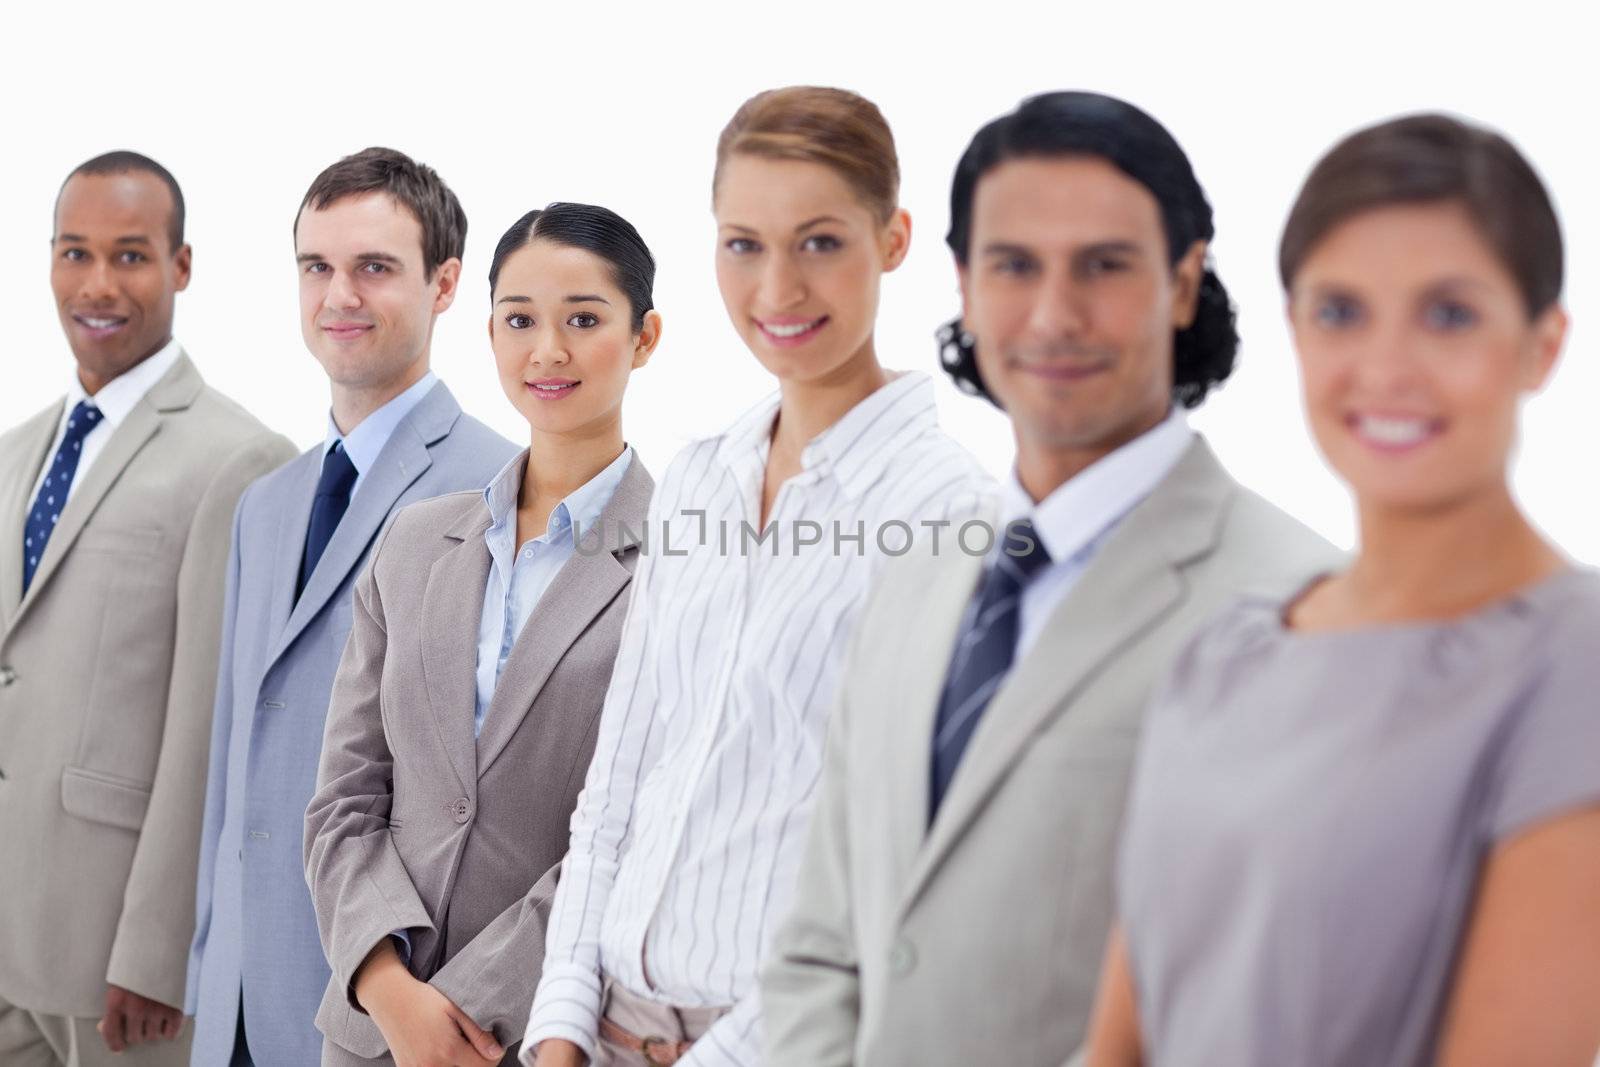 Close-up of smiling people dressed in suits looking straight with focus on the last three people